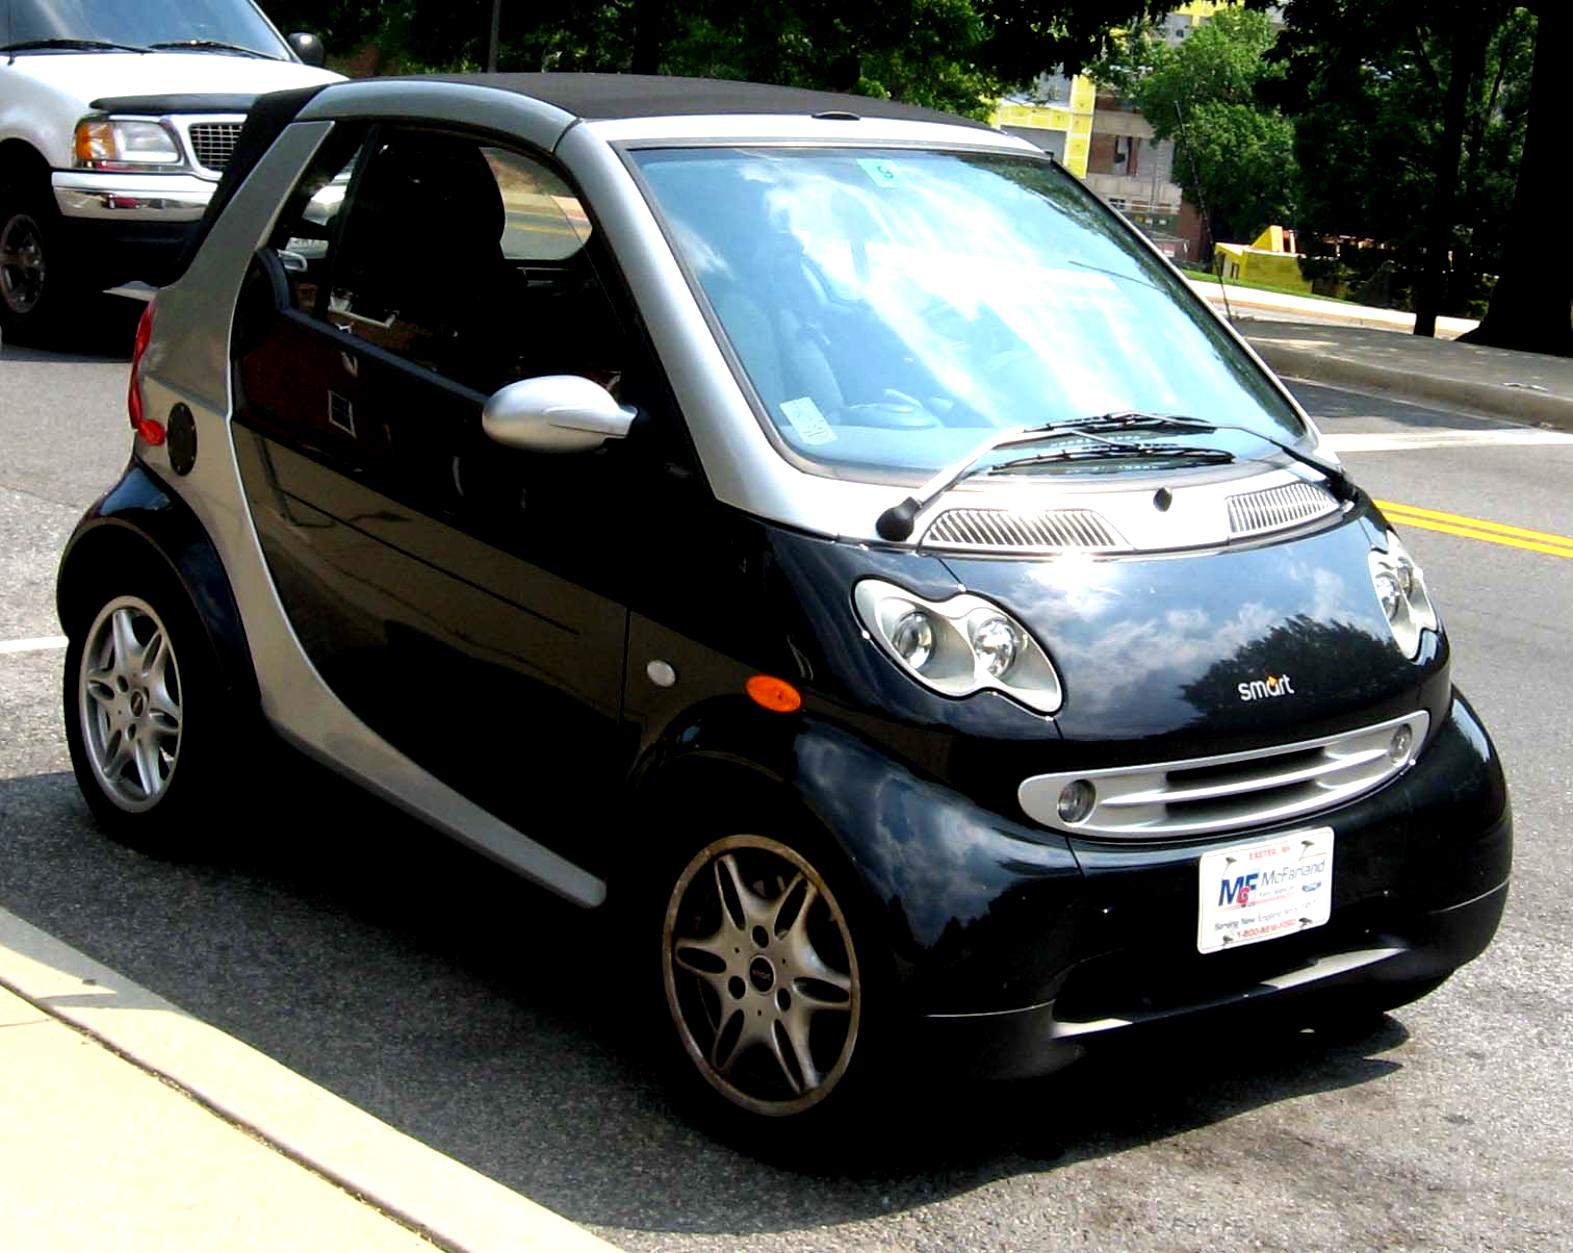 Smart ForTwo 2003 #12